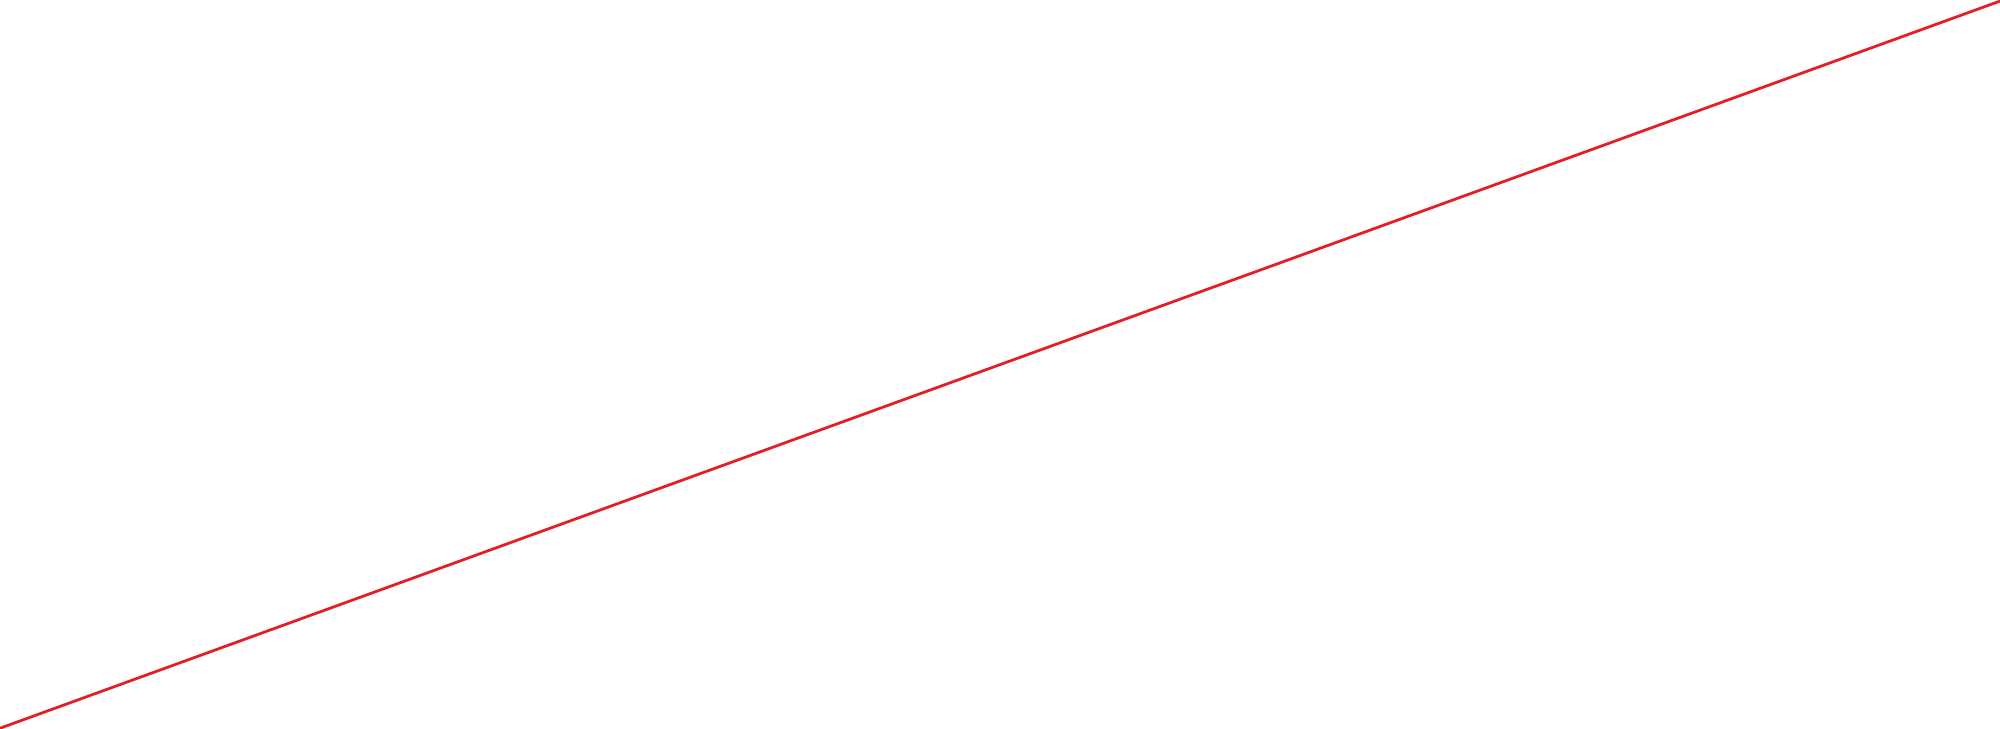 Download Png Line - Straight Hand Drawn Arrow (2000x729)